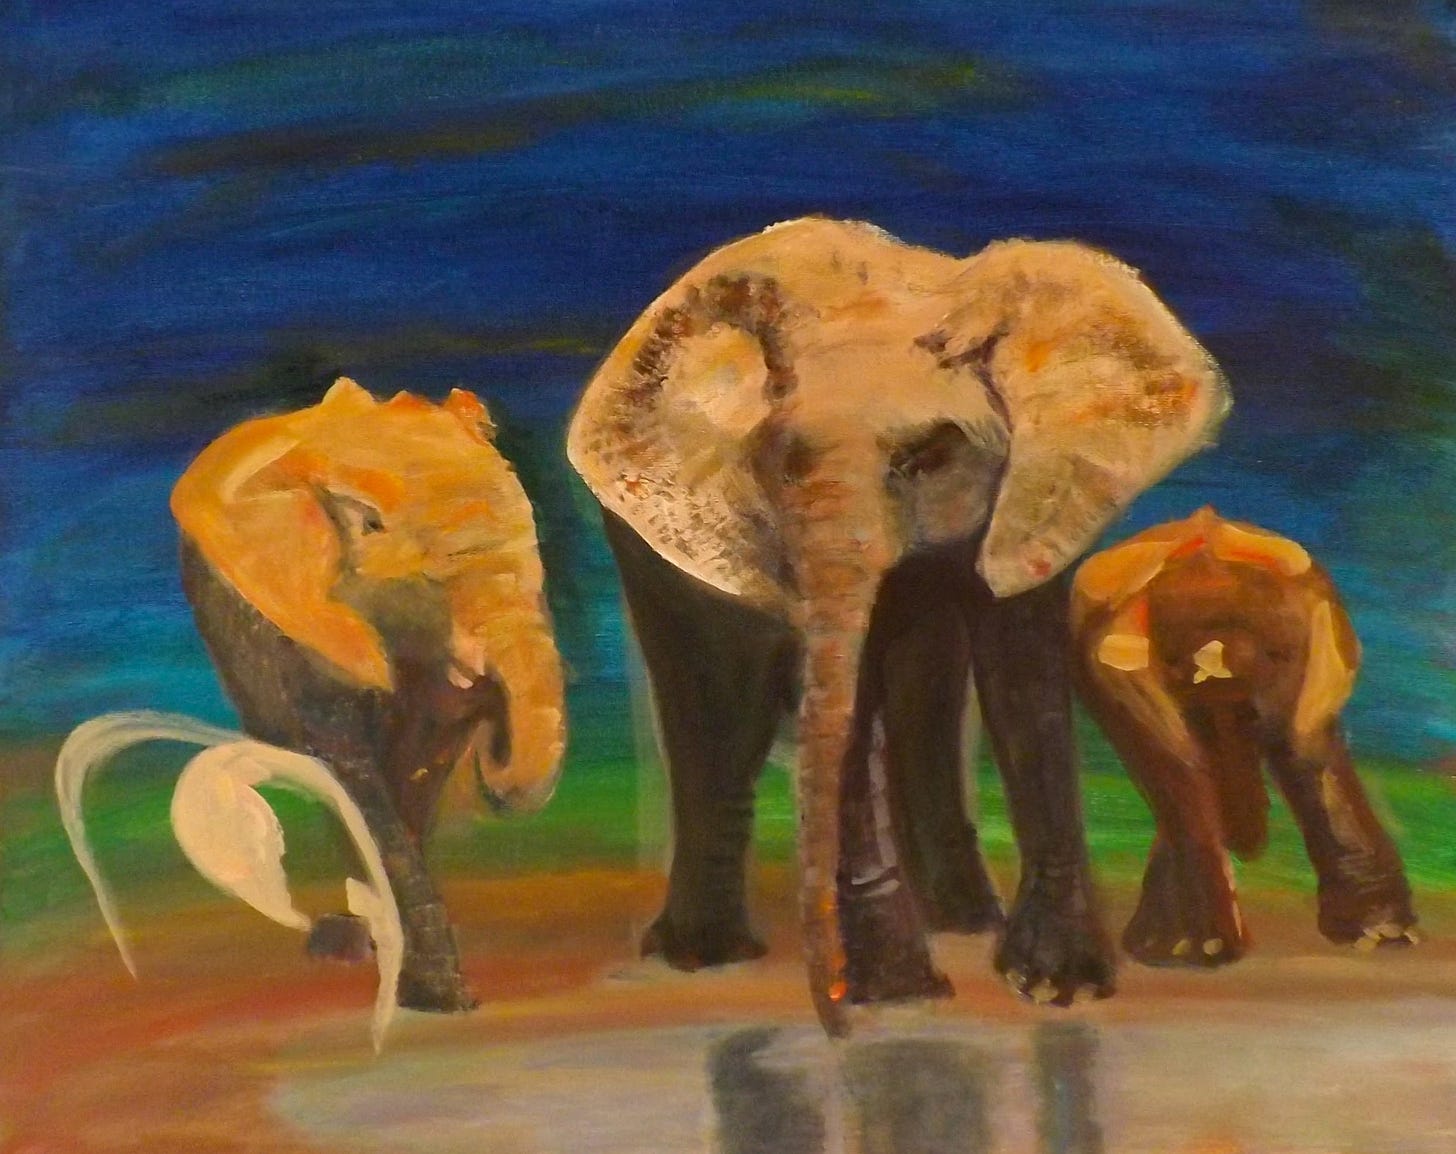 Acrylic painting of mother elephant and three calves in progress, one just a gesture in paint of its body.